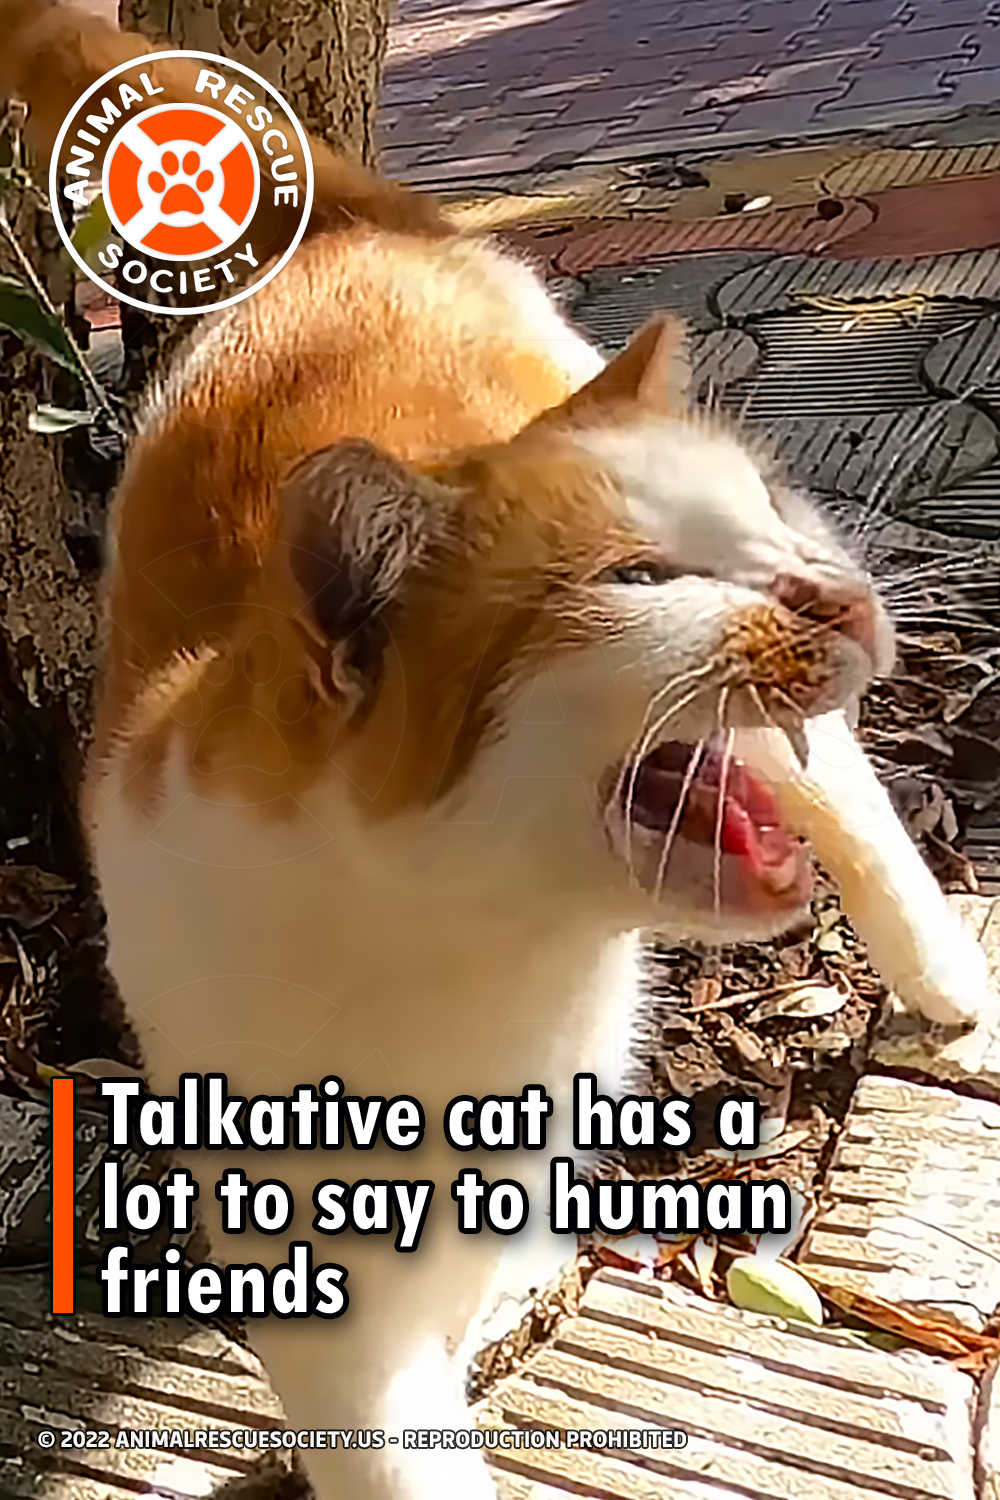 Talkative cat has a lot to say to human friends